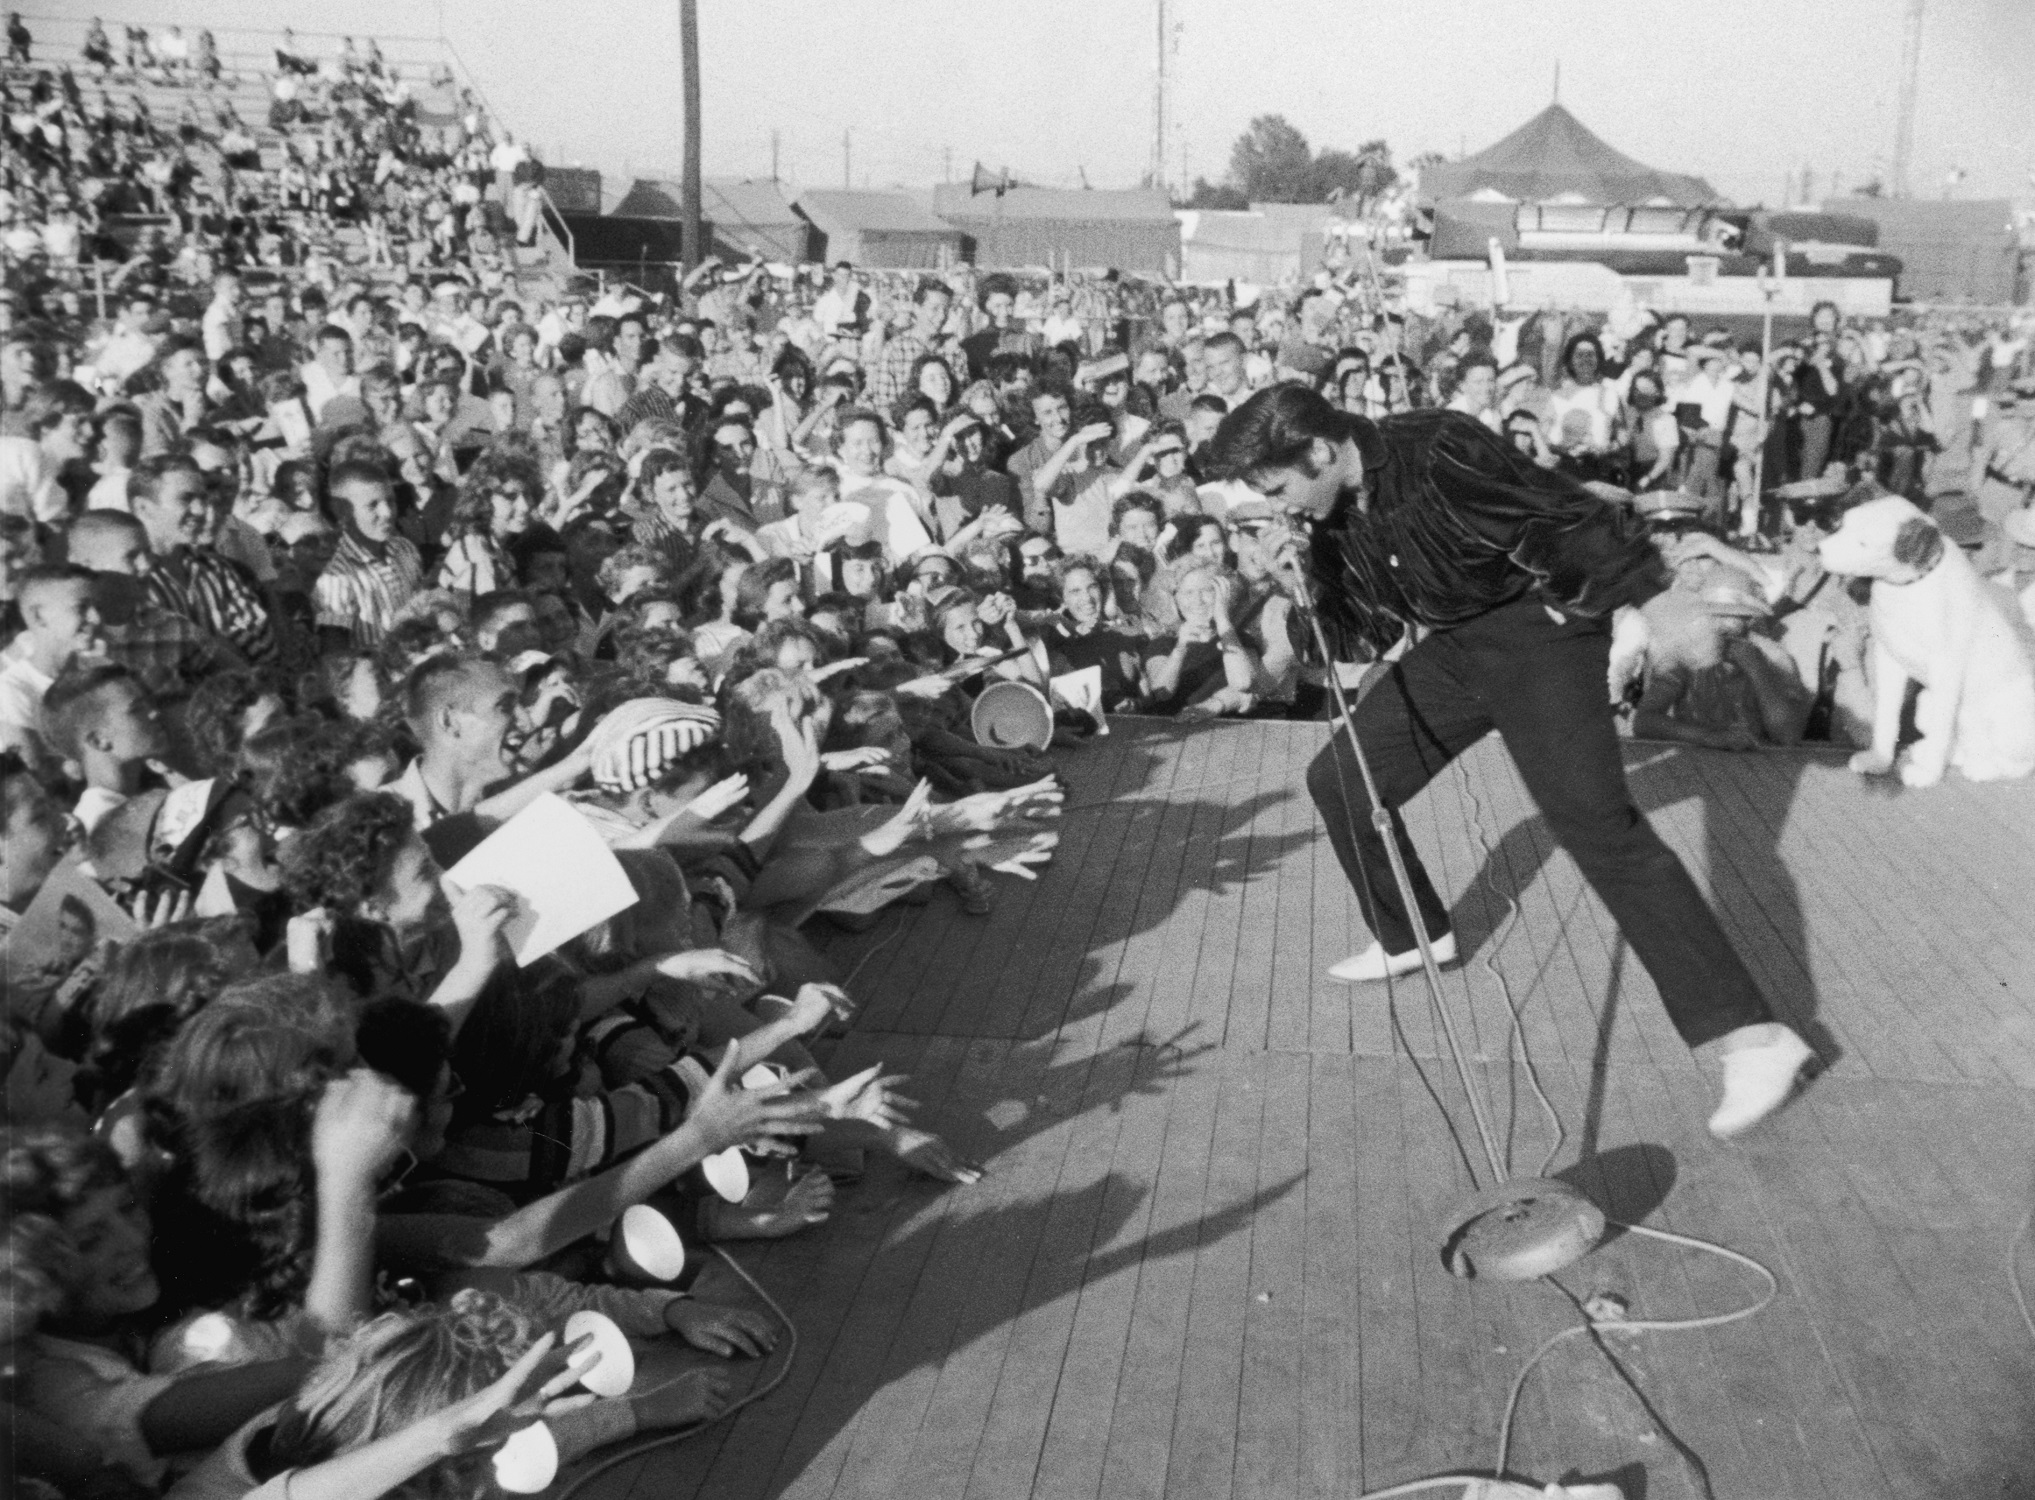 Elvis Presley performing to the adulation of a young crowd